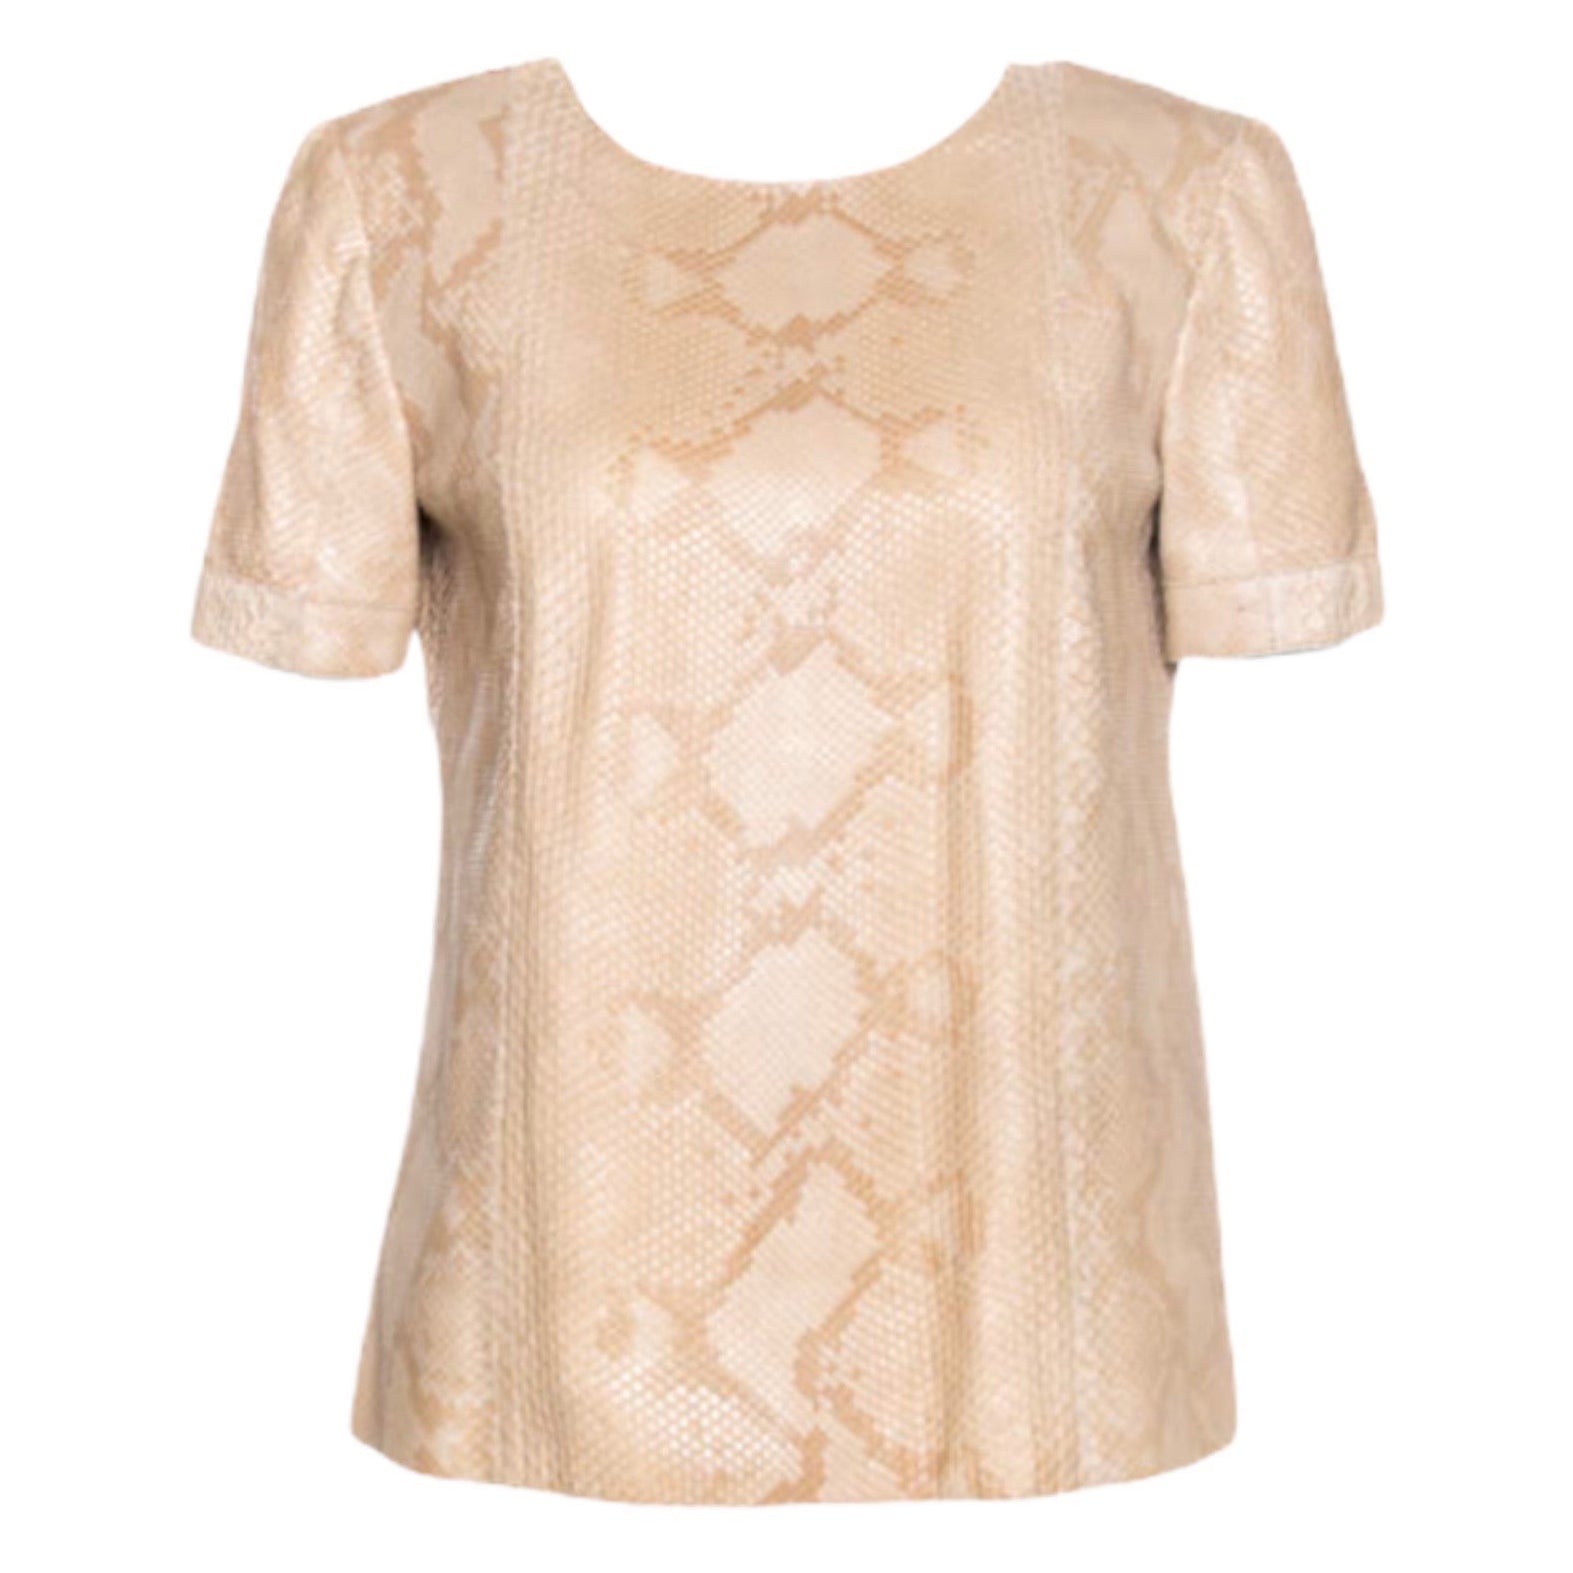 NEW Gucci Exotic Python Snake Skin Mat Leather Top Shirt Blouse 42